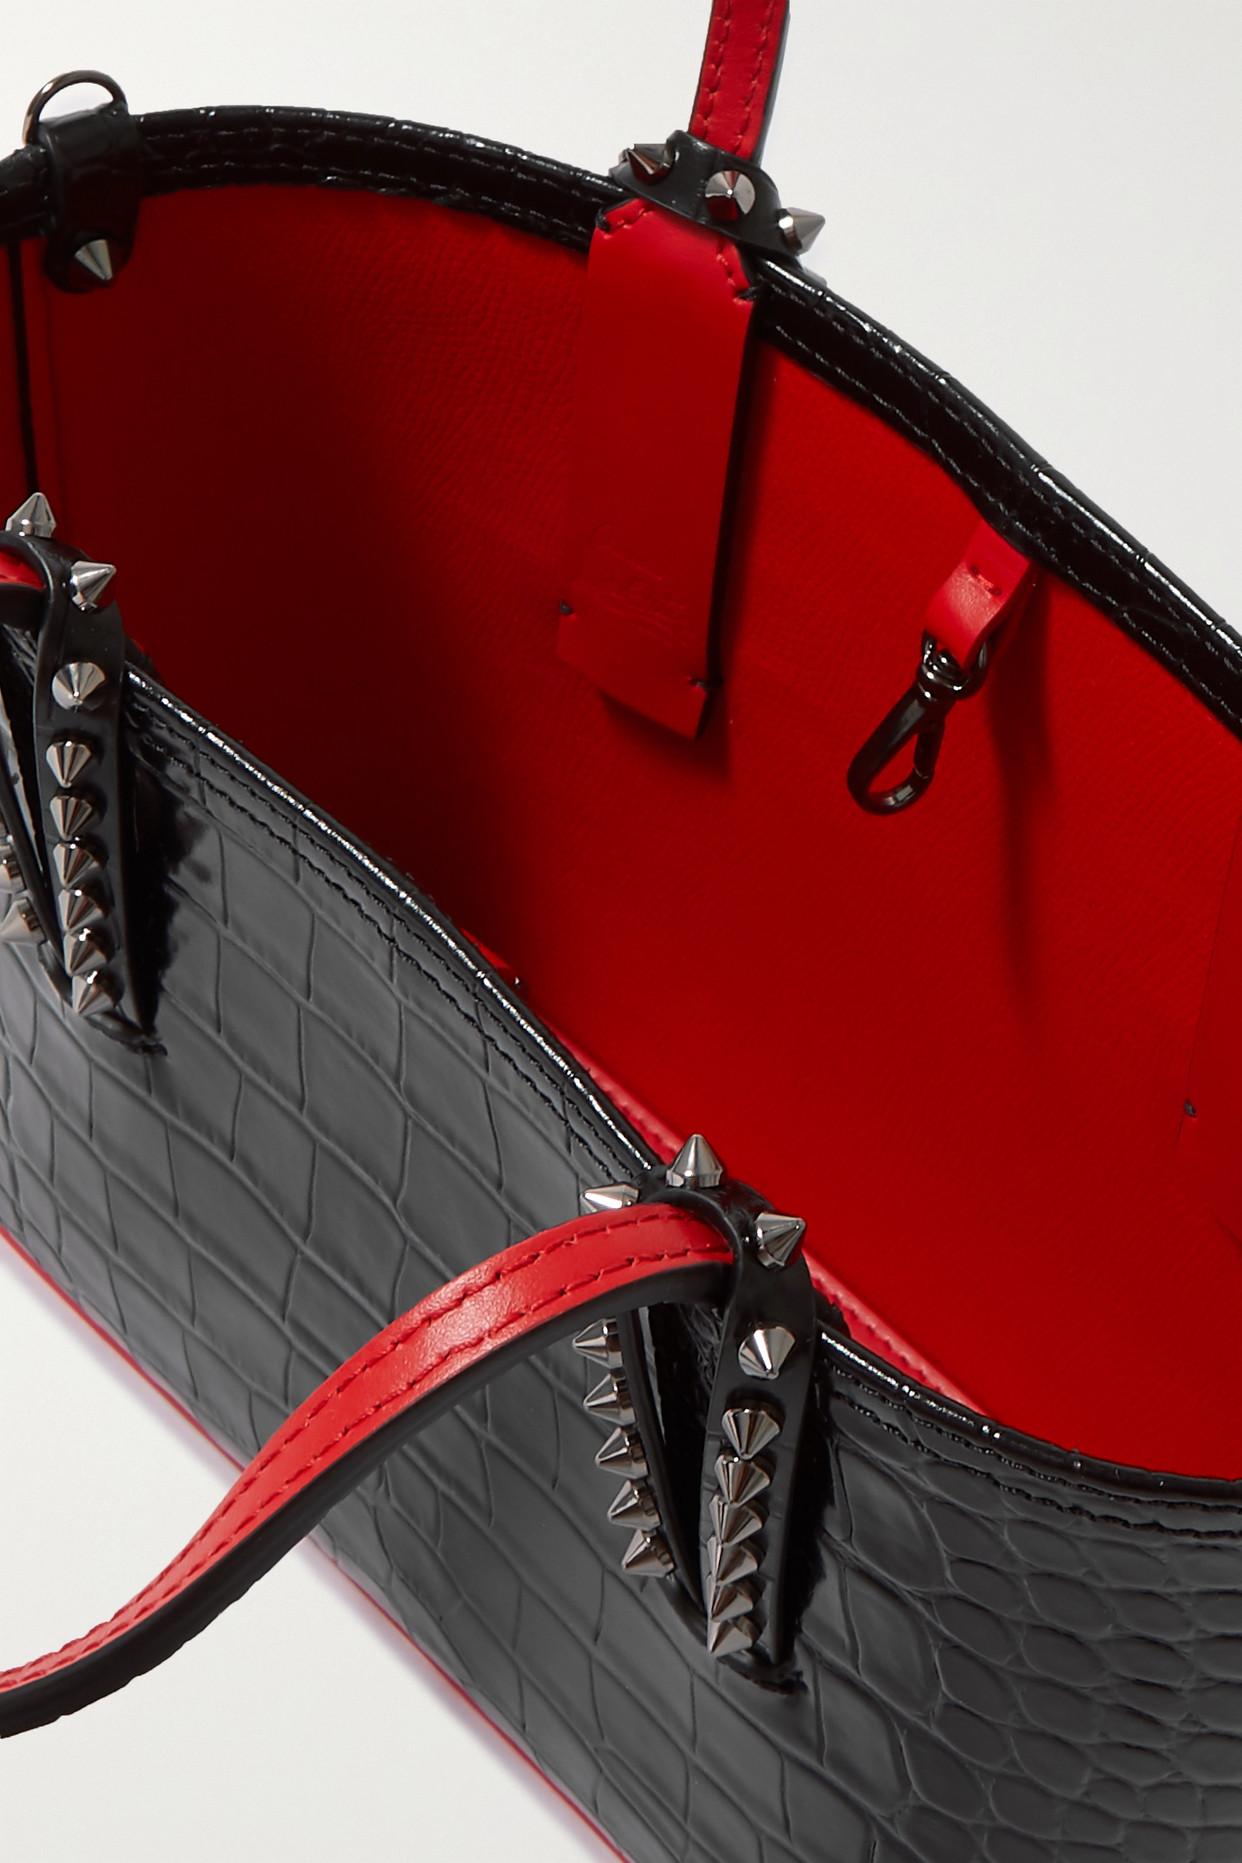 Cabata mini spiked croc-effect leather tote